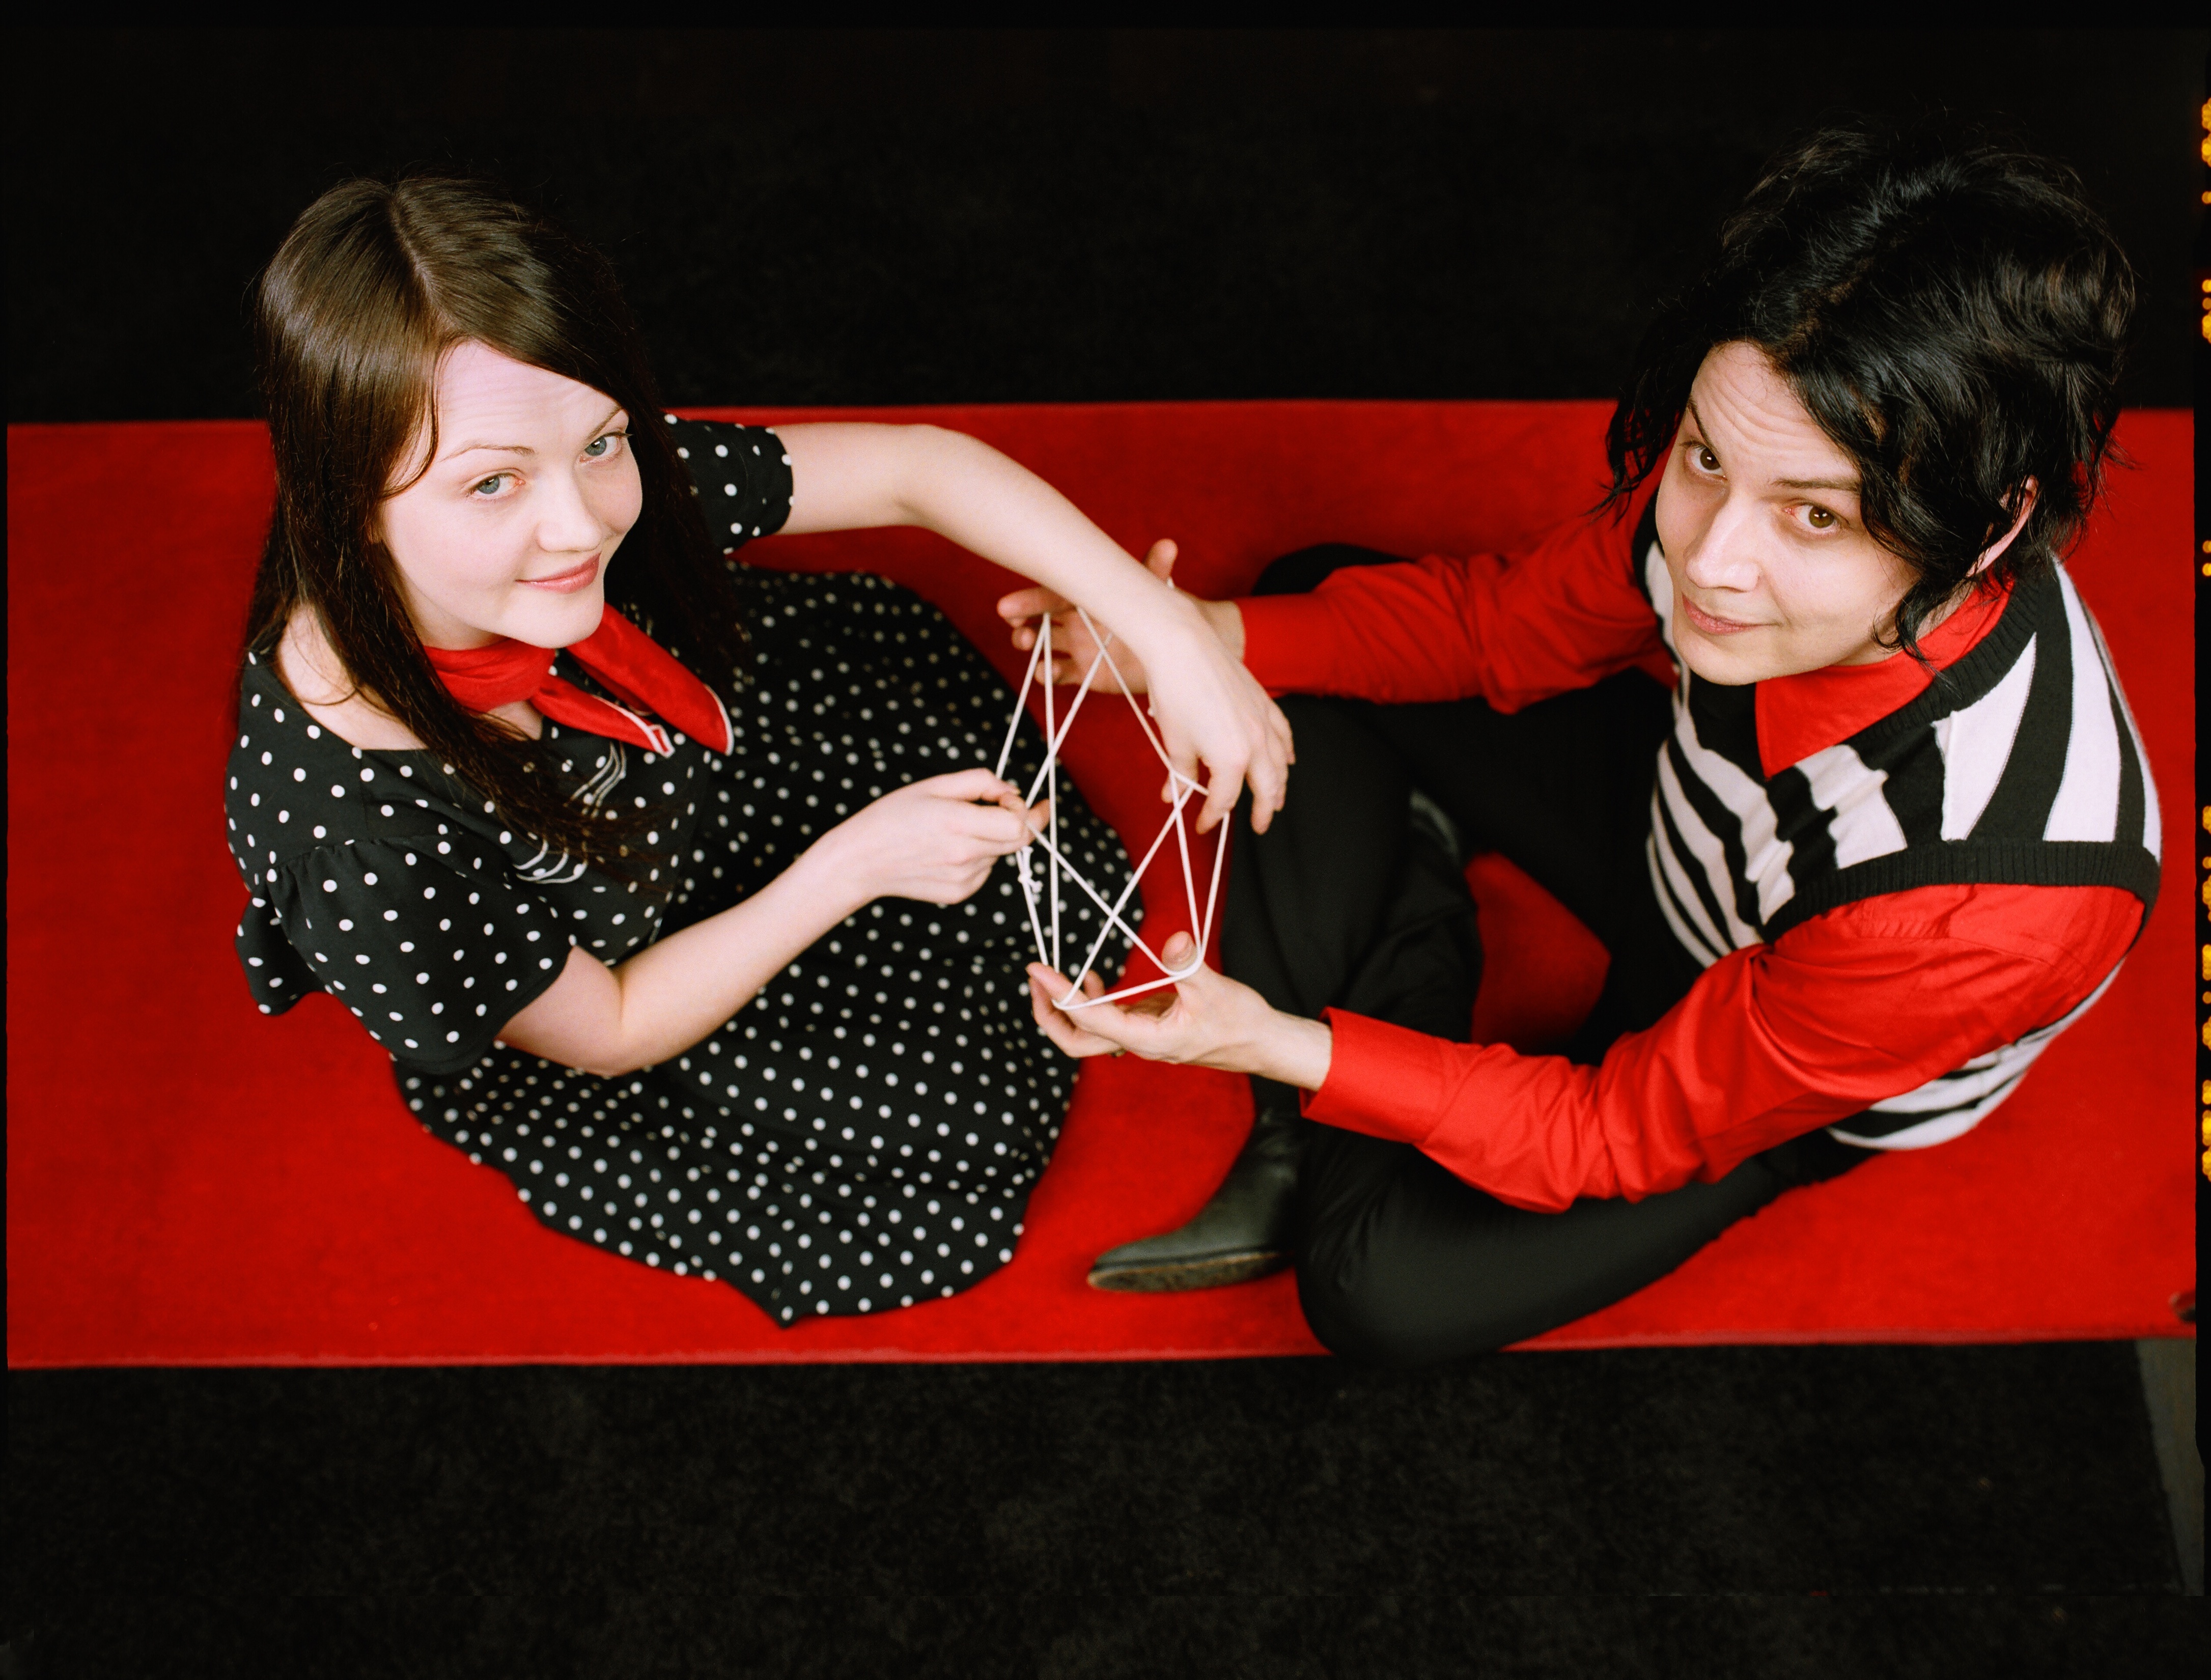 The White Stripes Backgrounds, Compatible - PC, Mobile, Gadgets| 4343x3300 px